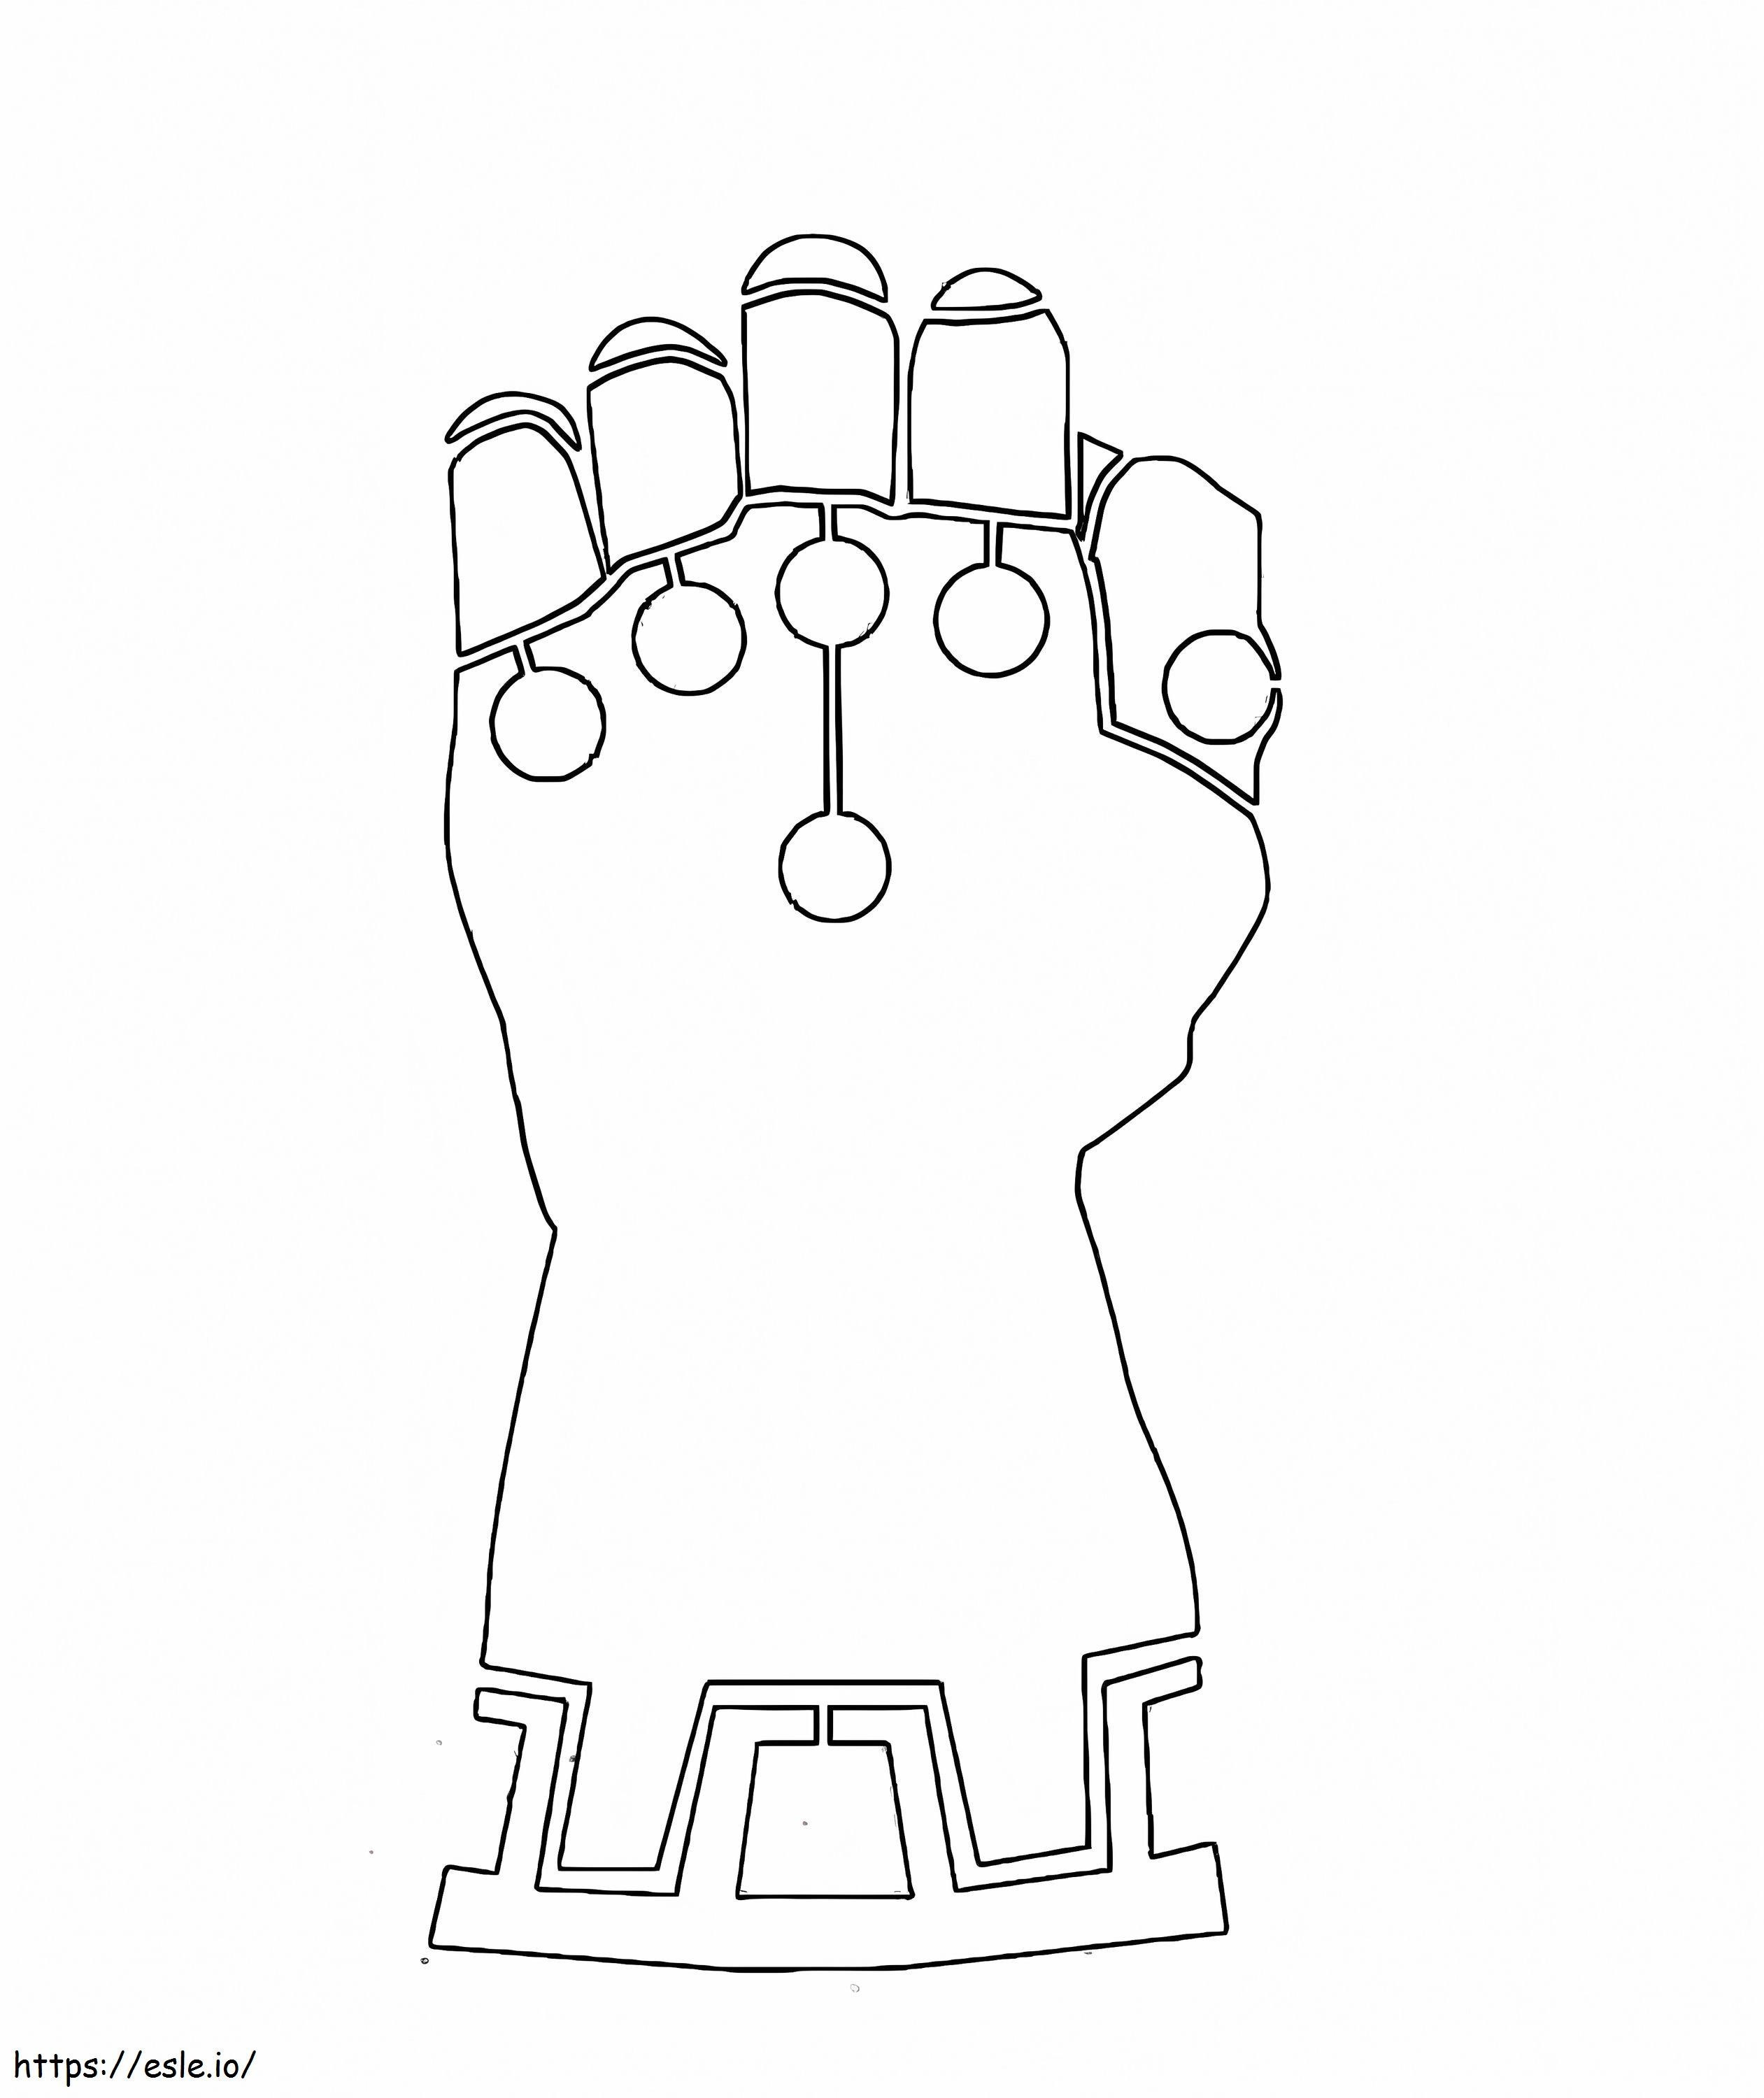 Basic Infinity Gauntlet coloring page